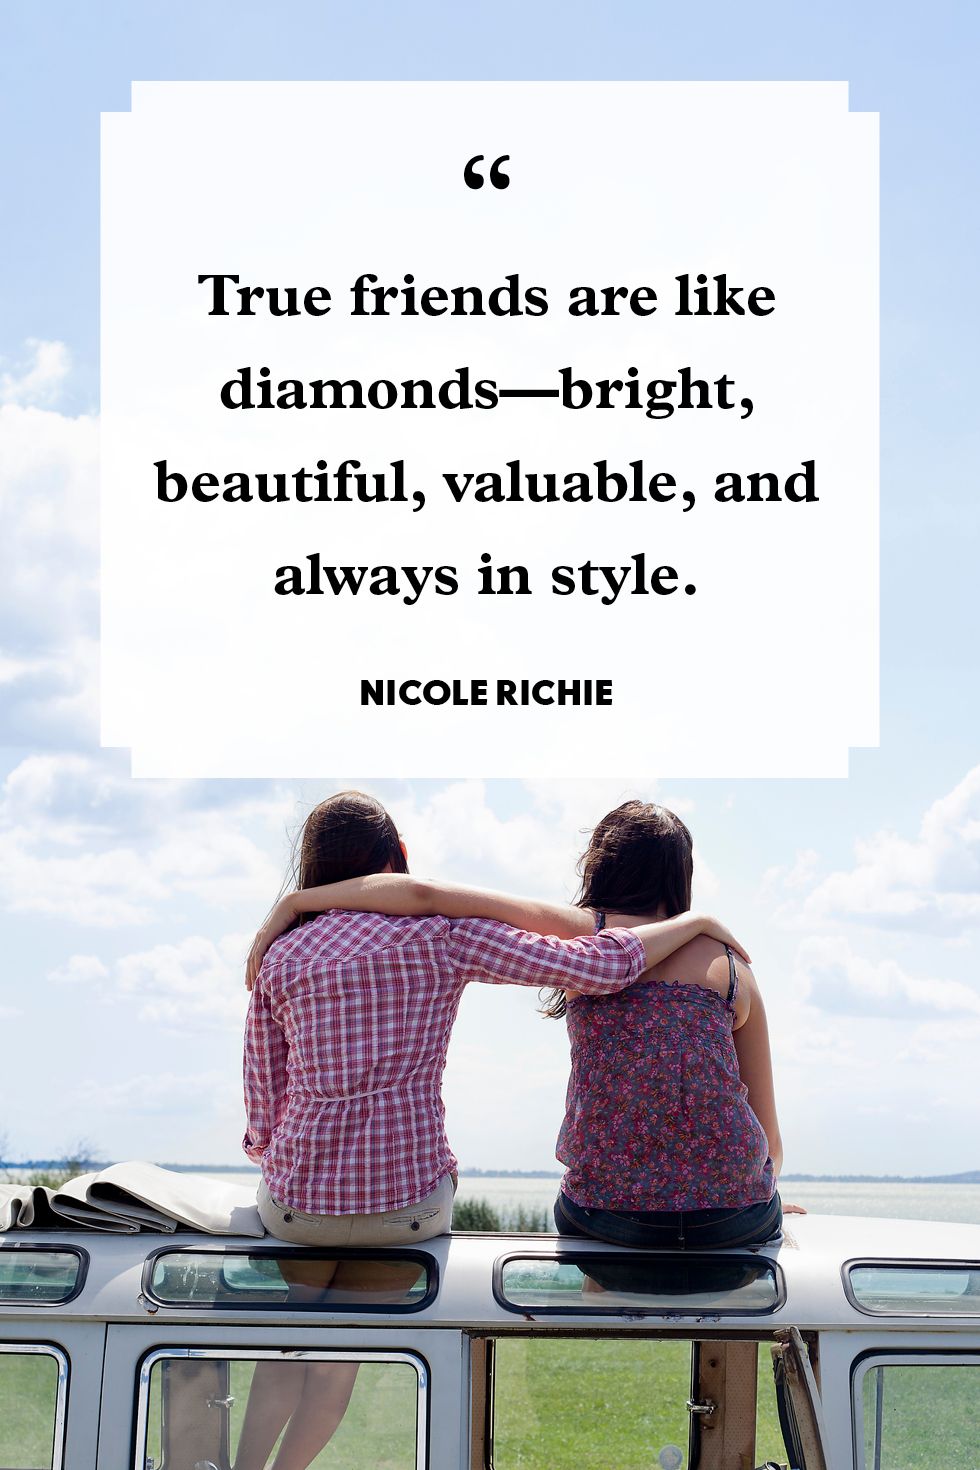 “Unforgettable Collection of Friendship Quotes Images – Over 999 Inspiring Quotes in Full 4K Resolution”